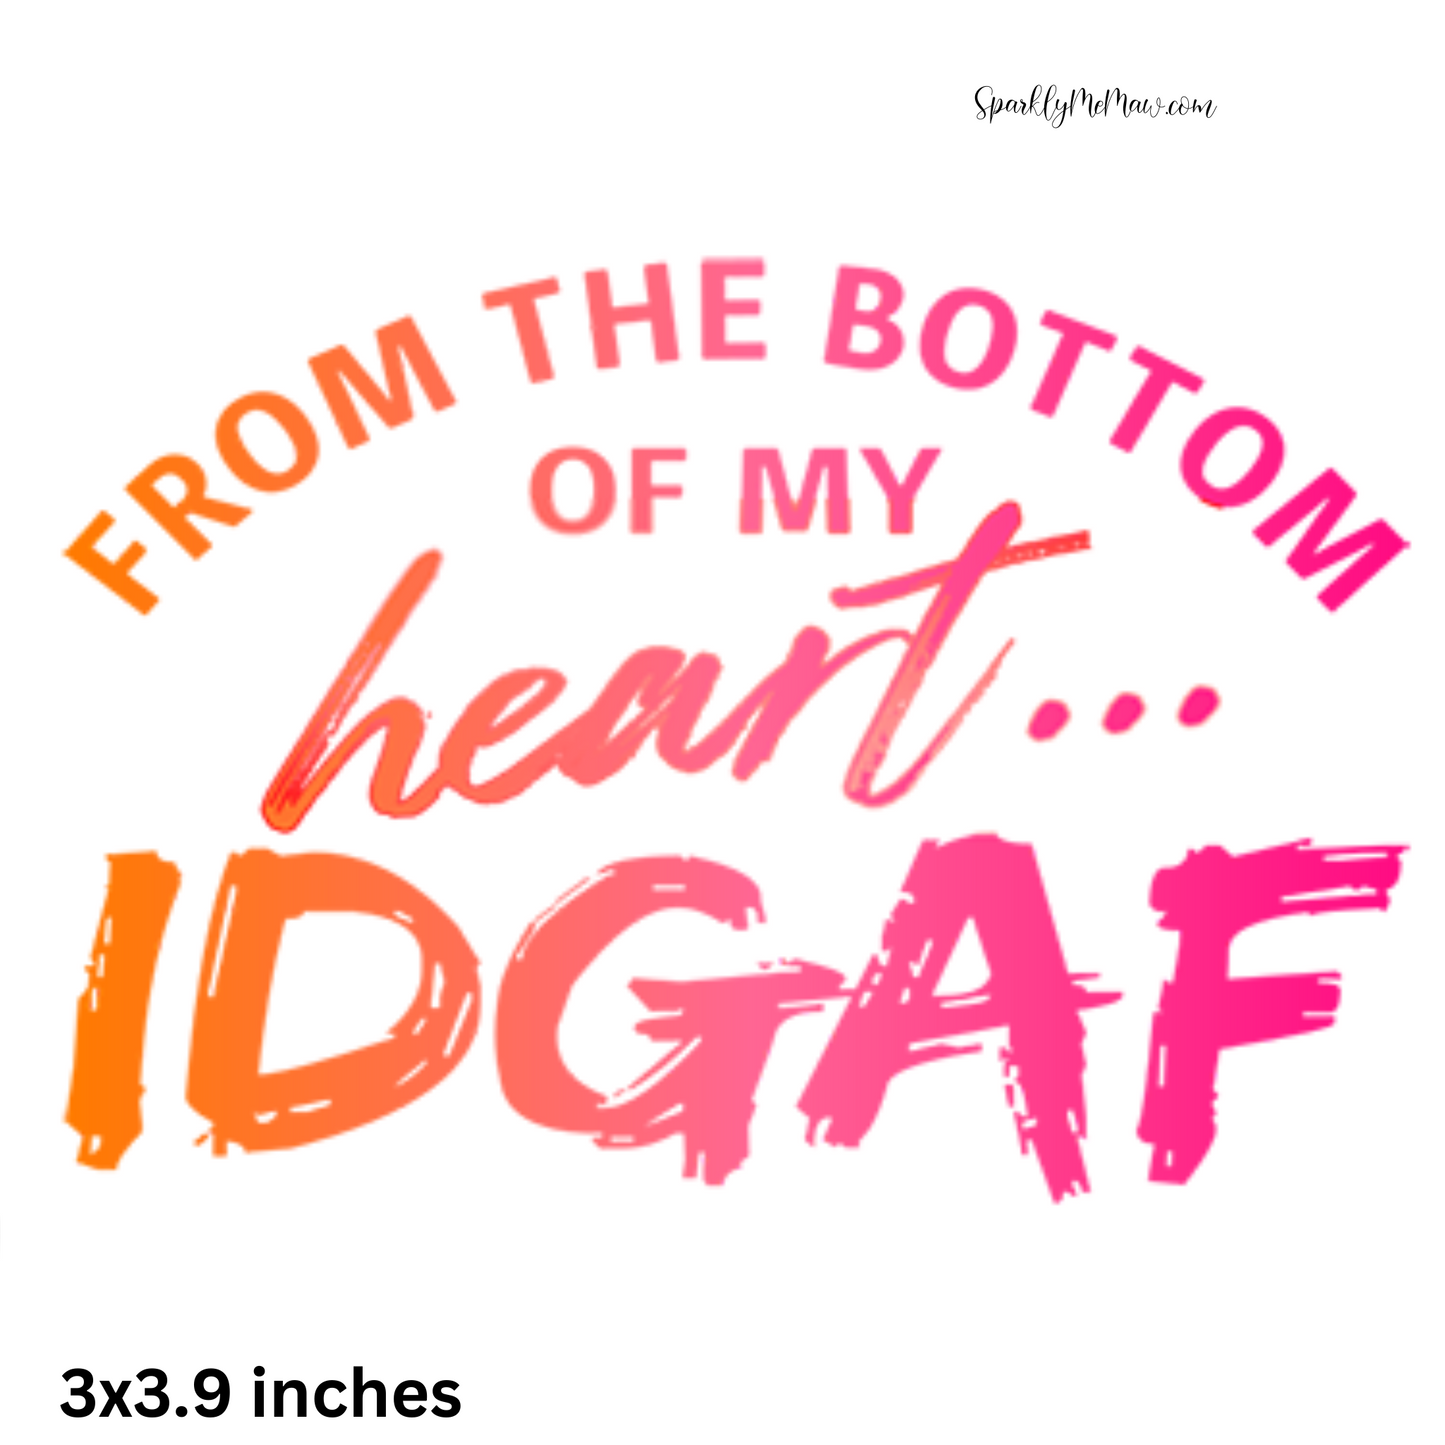 From the Bottom of my heart IDGAF UV 3x3.9 inch decal